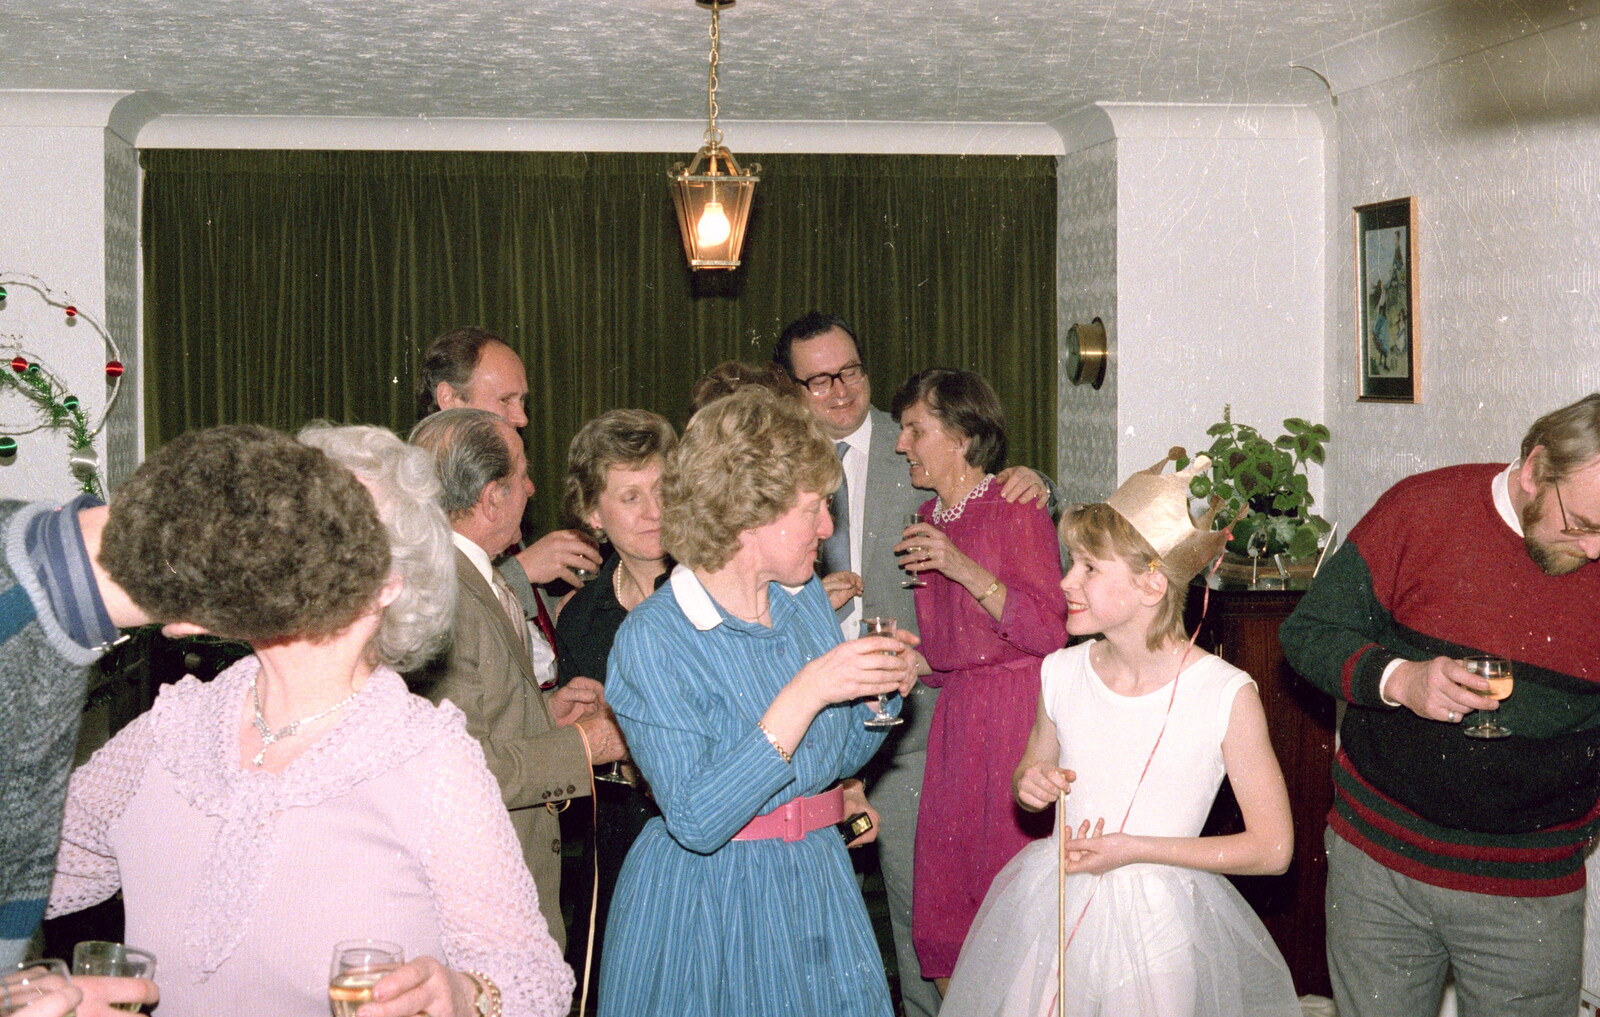 Someone chats to Alice from New Year's Eve at Anna's, Walkford, Dorset - 31st December 1985